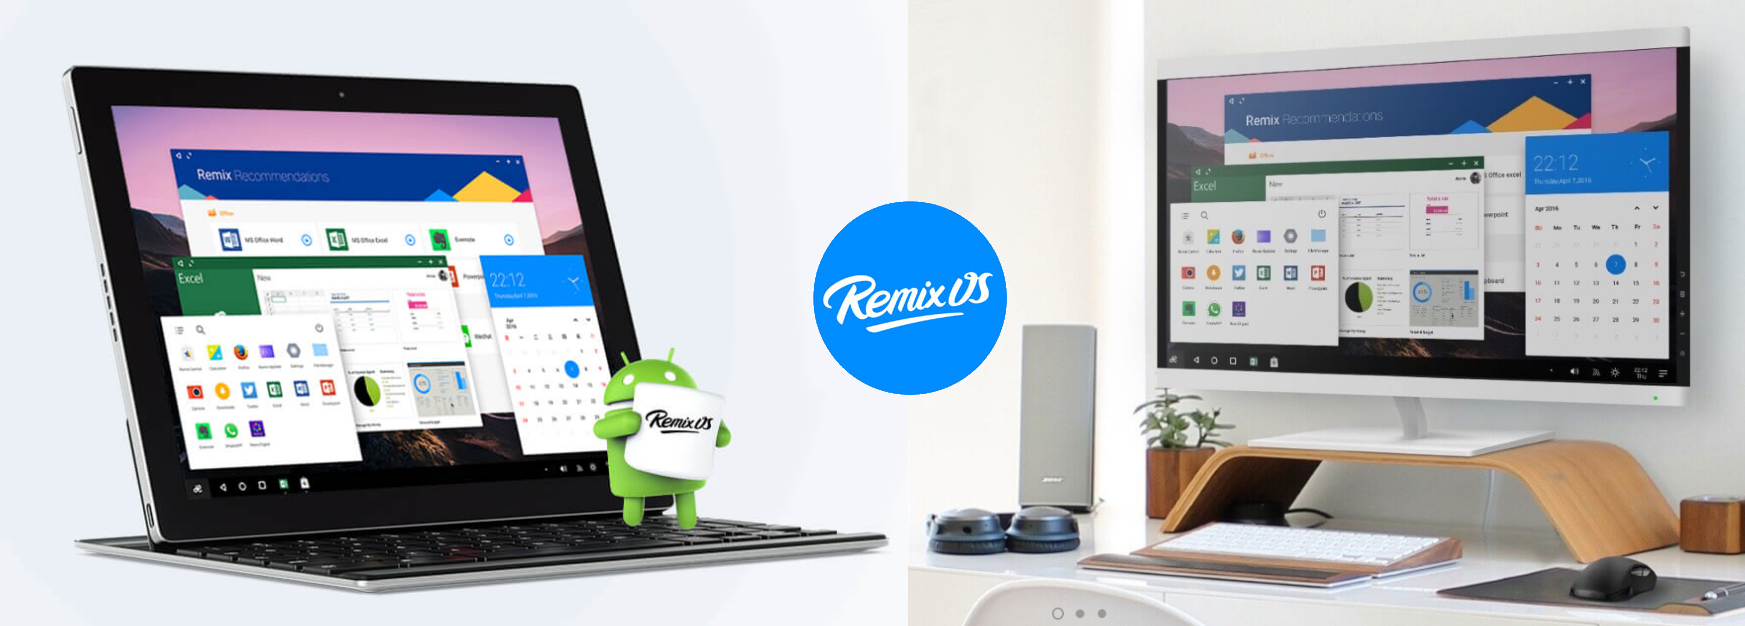 Remix_OS_Android_PC_Tablet_Windows_Dual_Boot